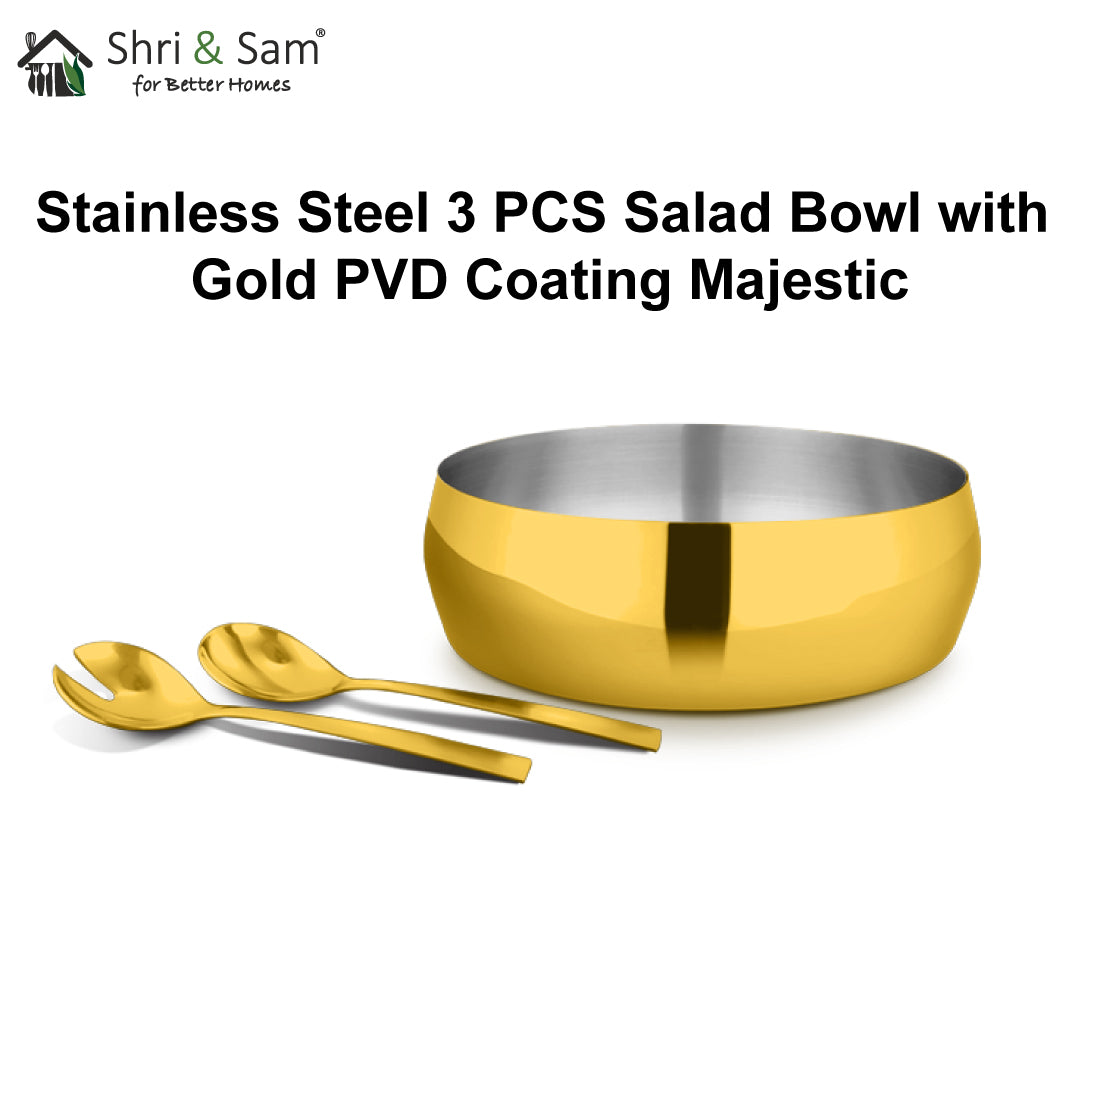 Stainless Steel 3 PCS Salad Bowl with Gold PVD Coating Majestic